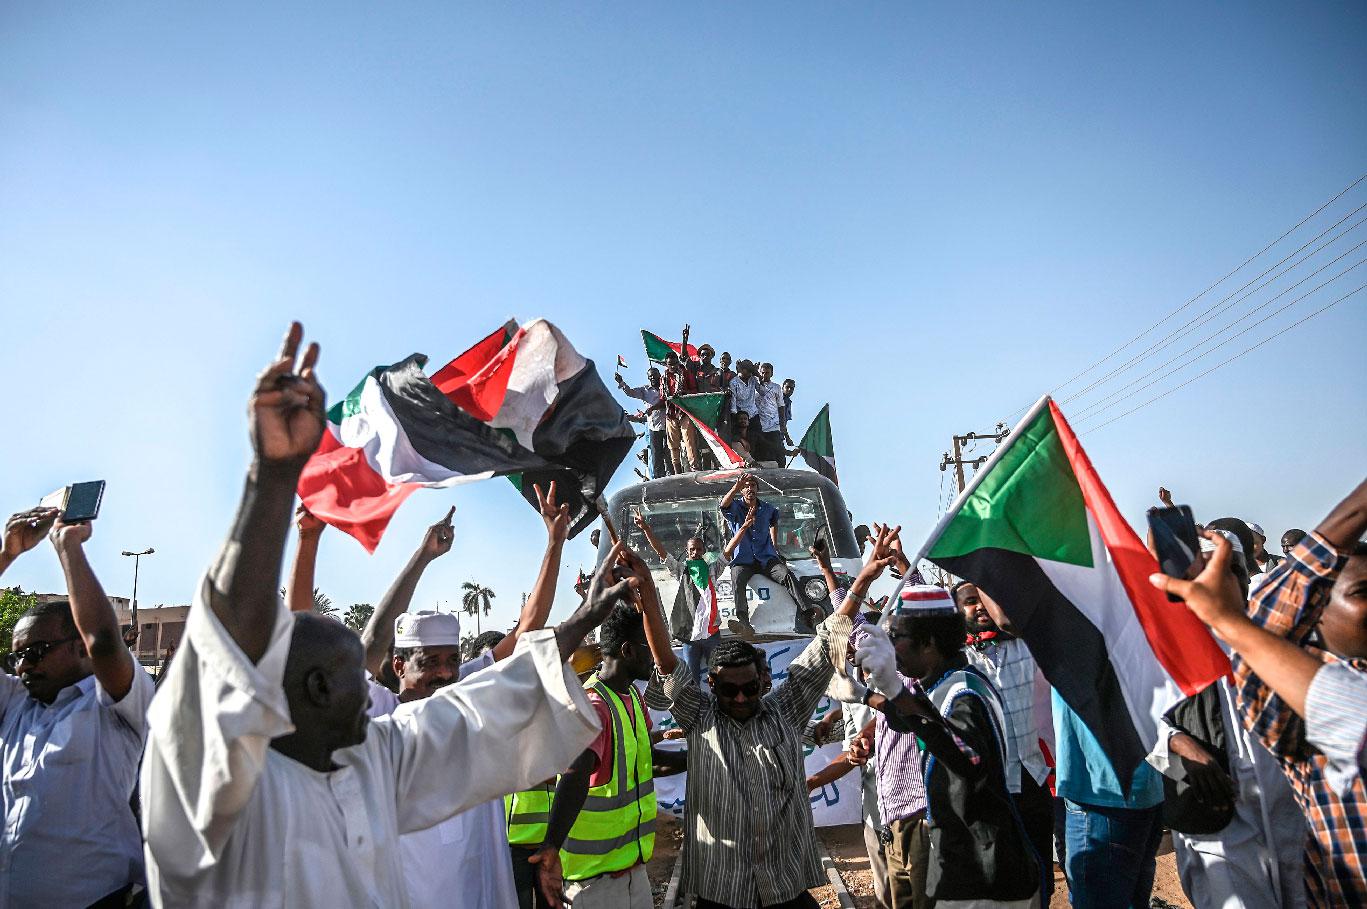 Sudanese protesters from the city of Atbara, sitting atop a train, arrive at the Bahari station in Khartoum